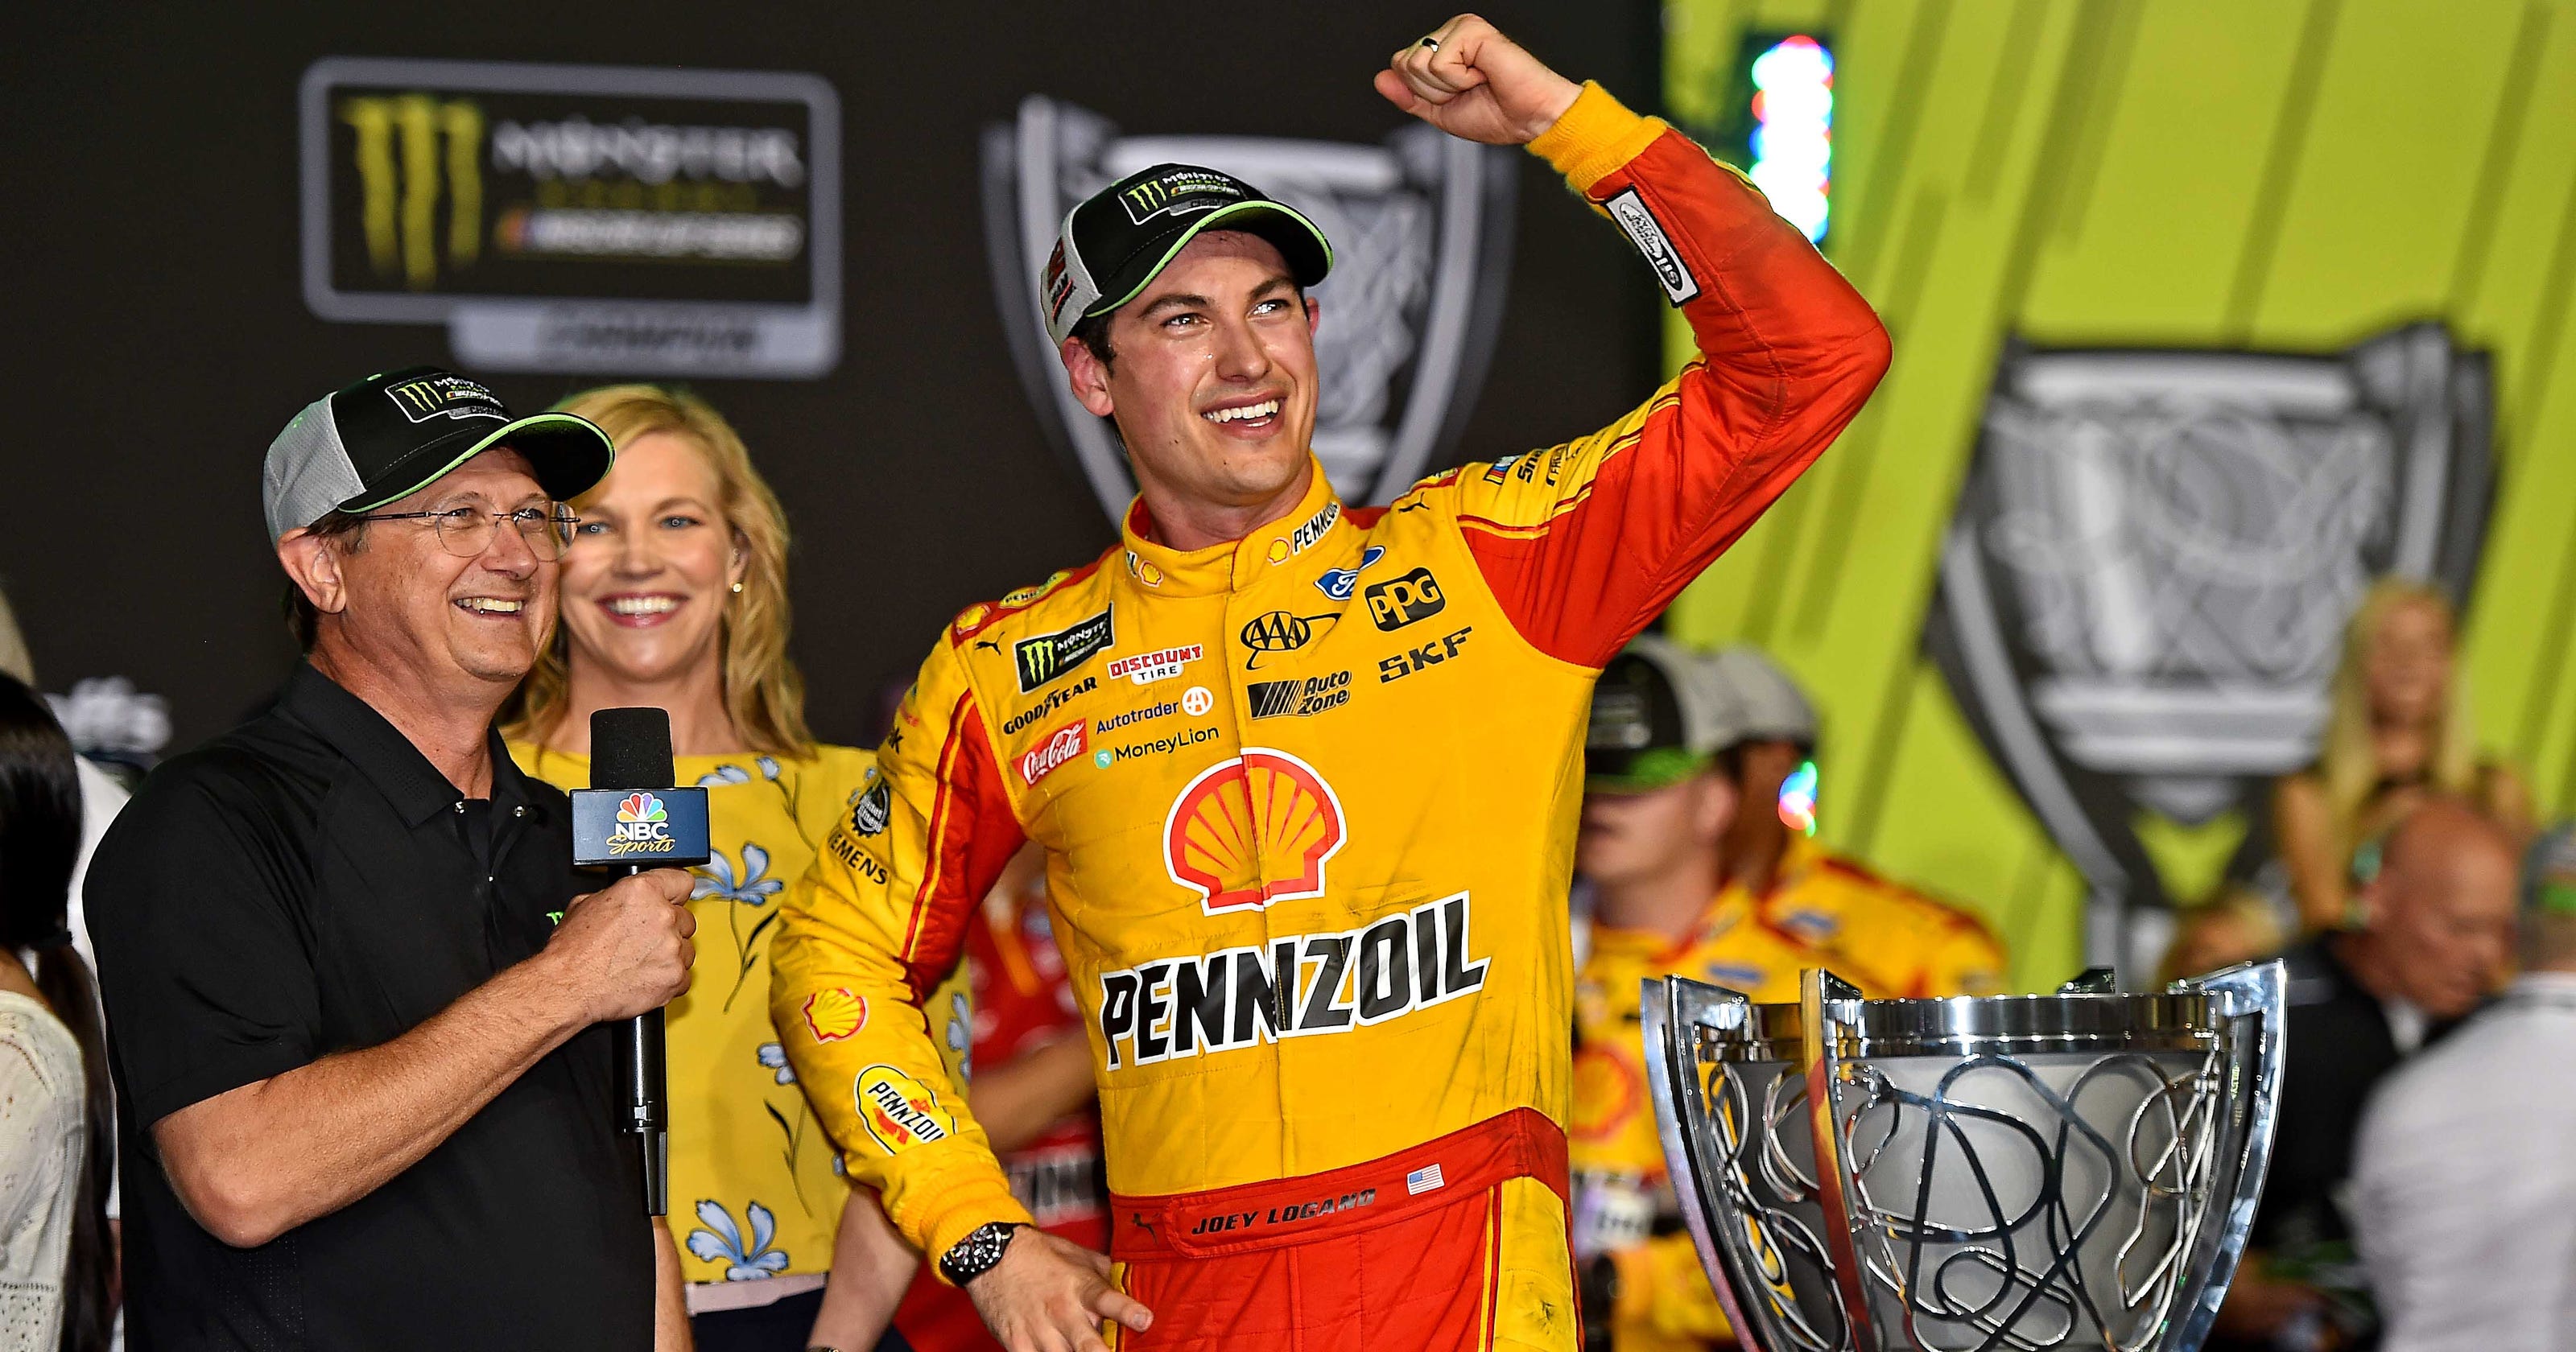 Joey Logano wins first NASCAR Cup championship at Homestead finale